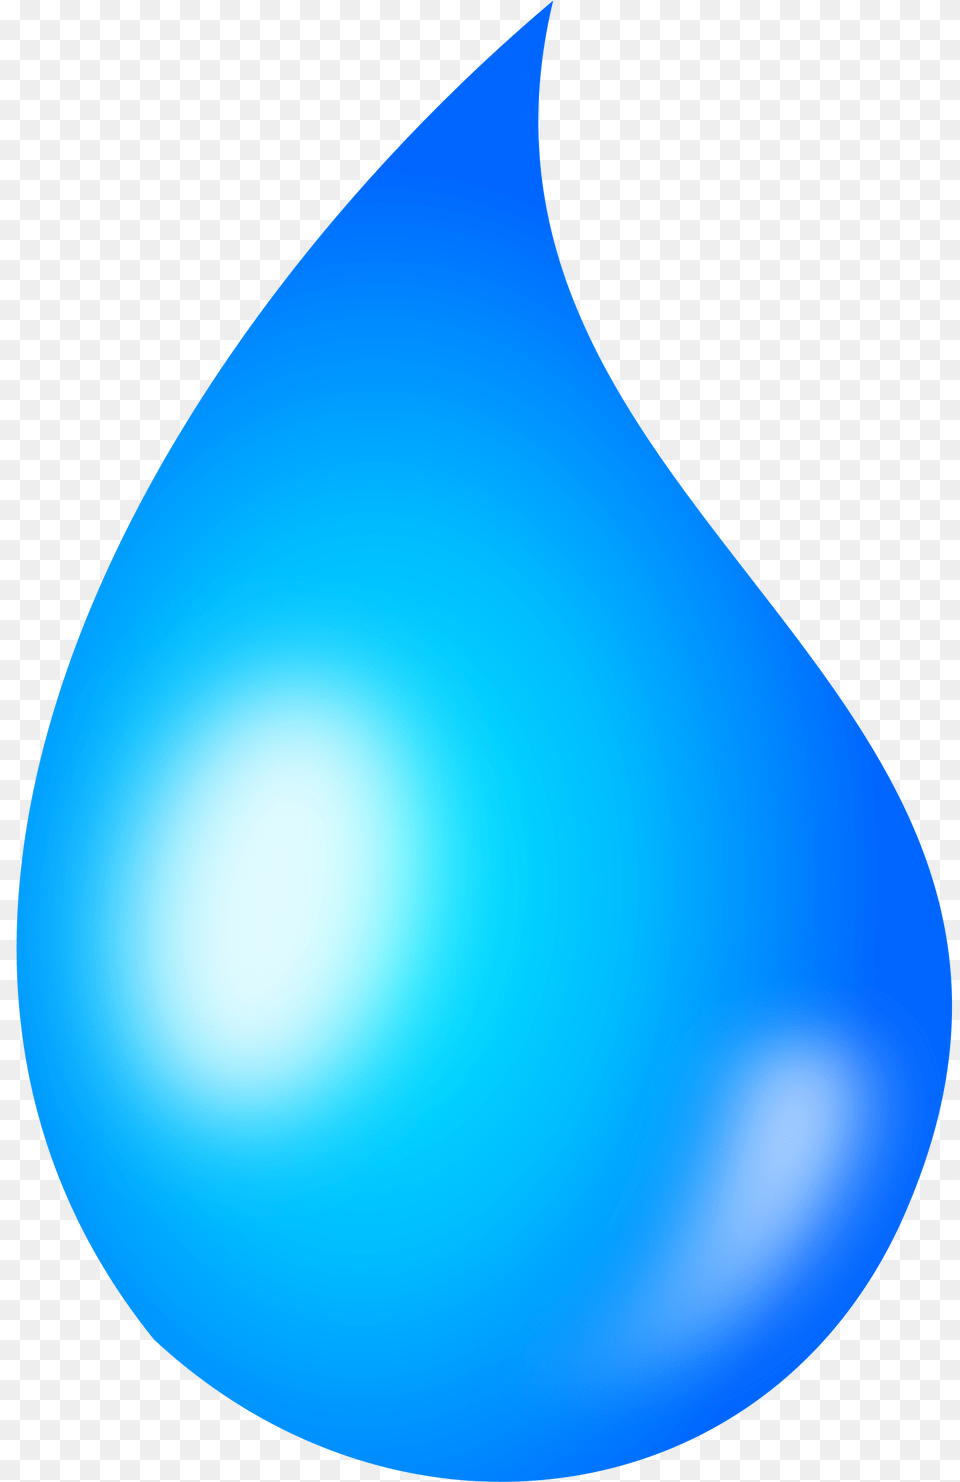 Free Teardrop Transparent Background Clip Art Water Drop, Droplet, Lighting, Balloon, Astronomy Png